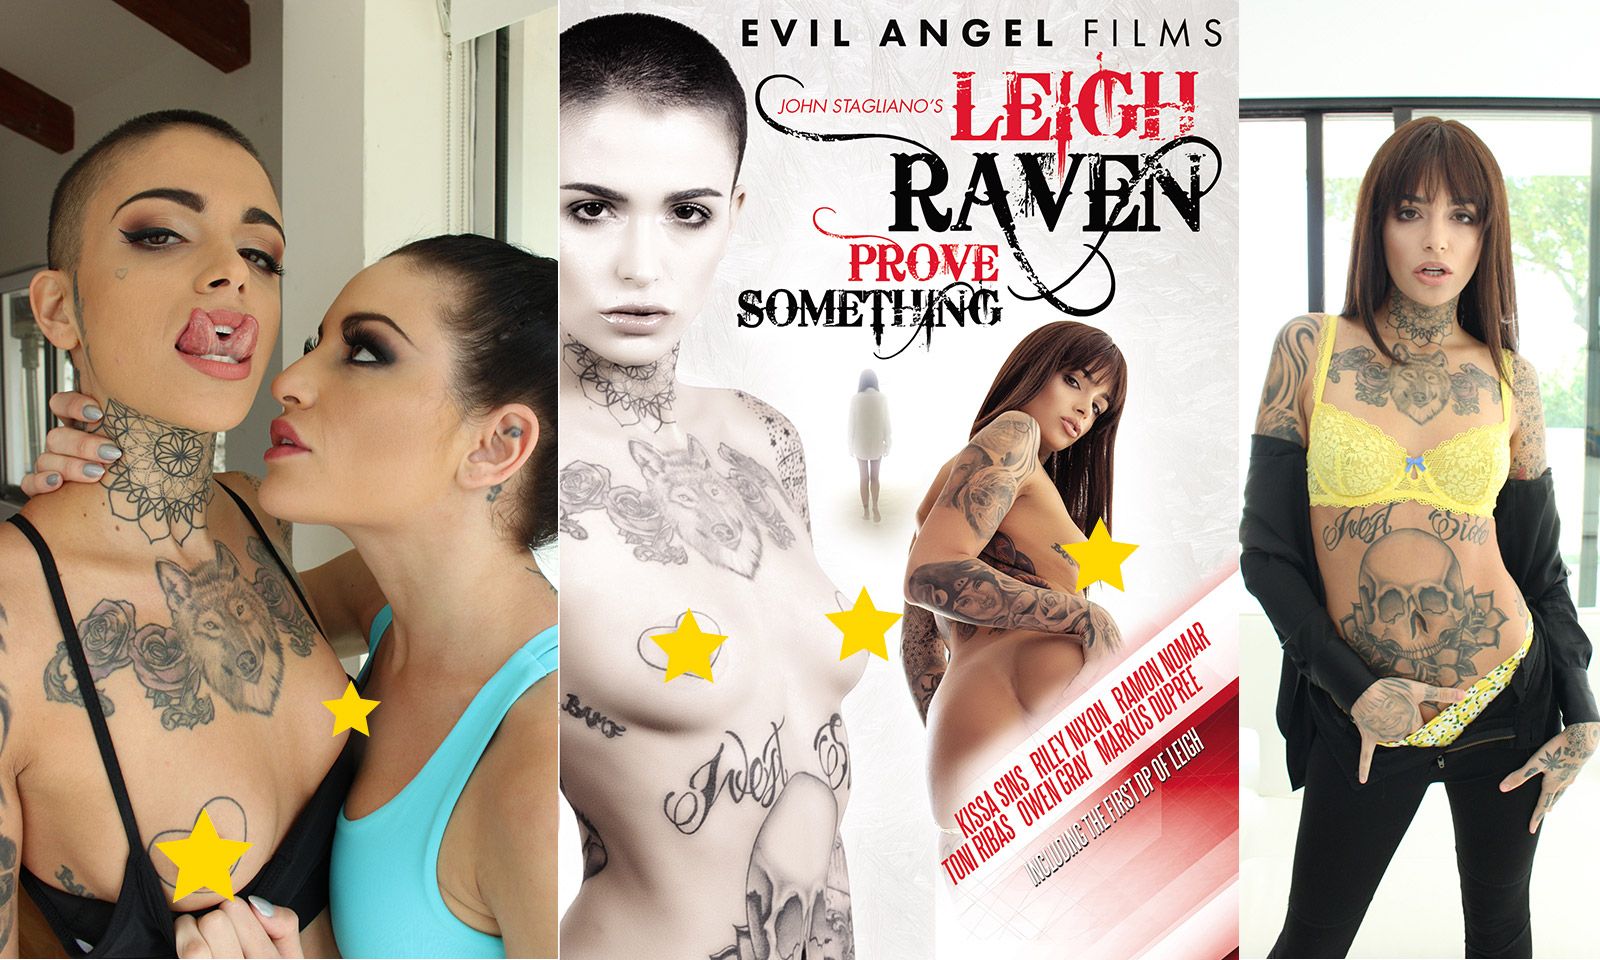 Evil Angel's ‘Leigh Raven Prove Something’ Coming To DVD